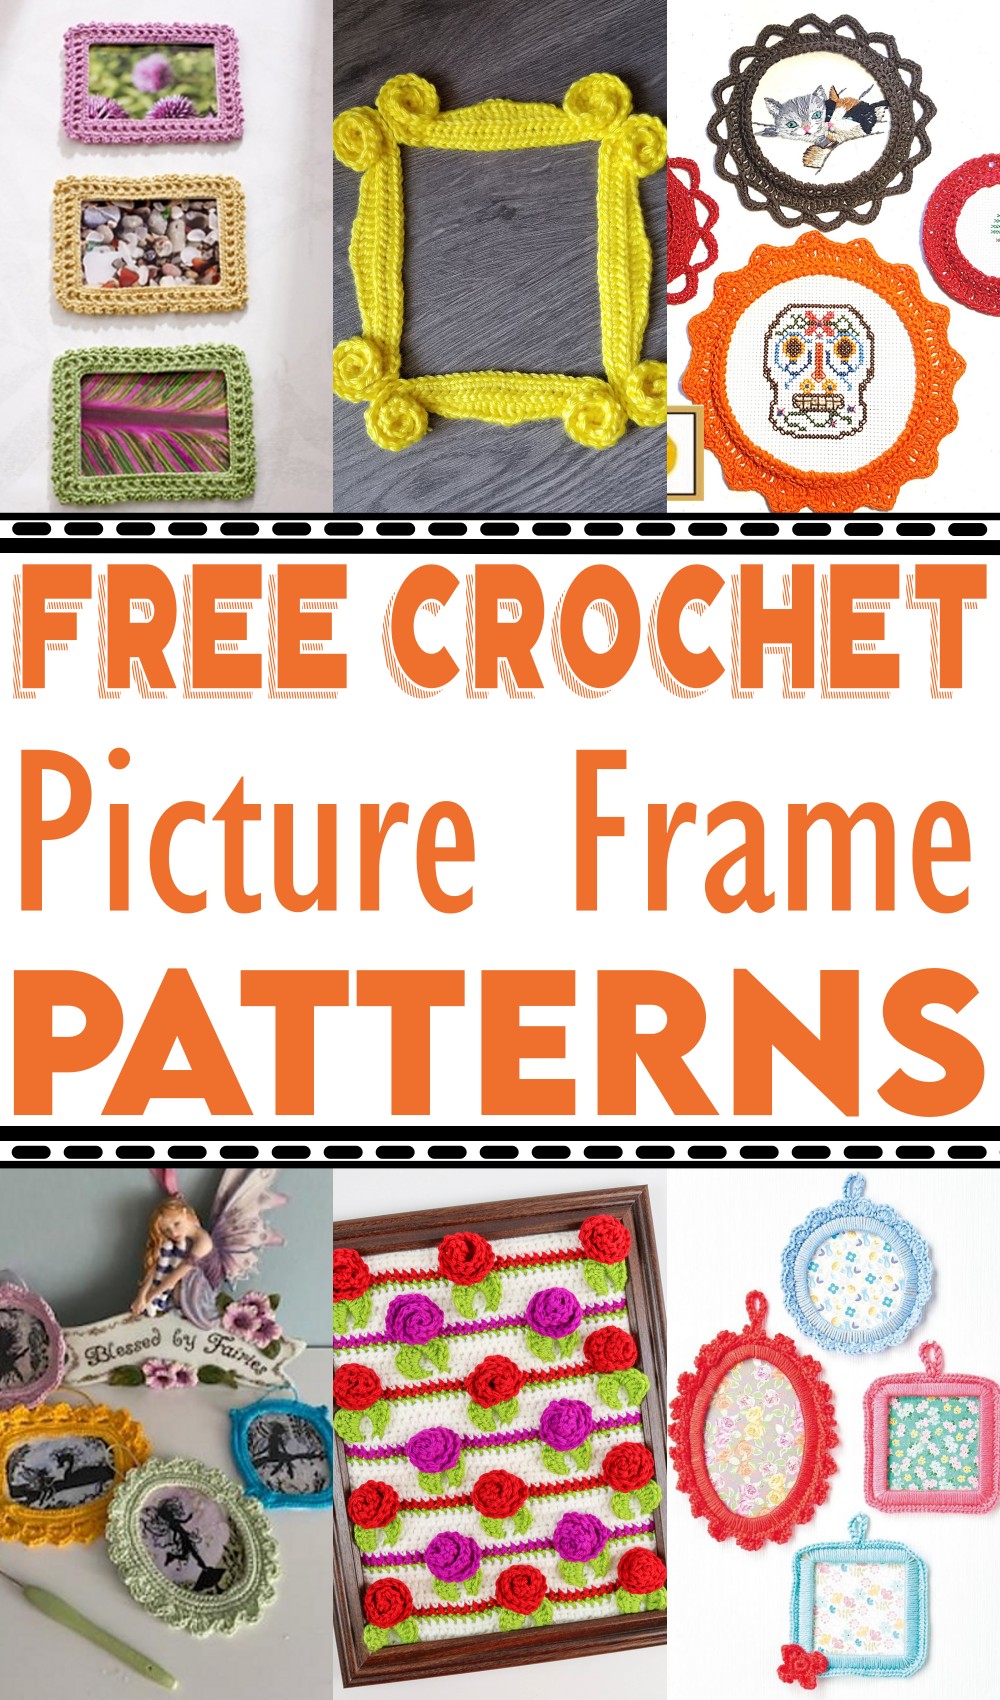 Free Crochet Picture Frame Patterns